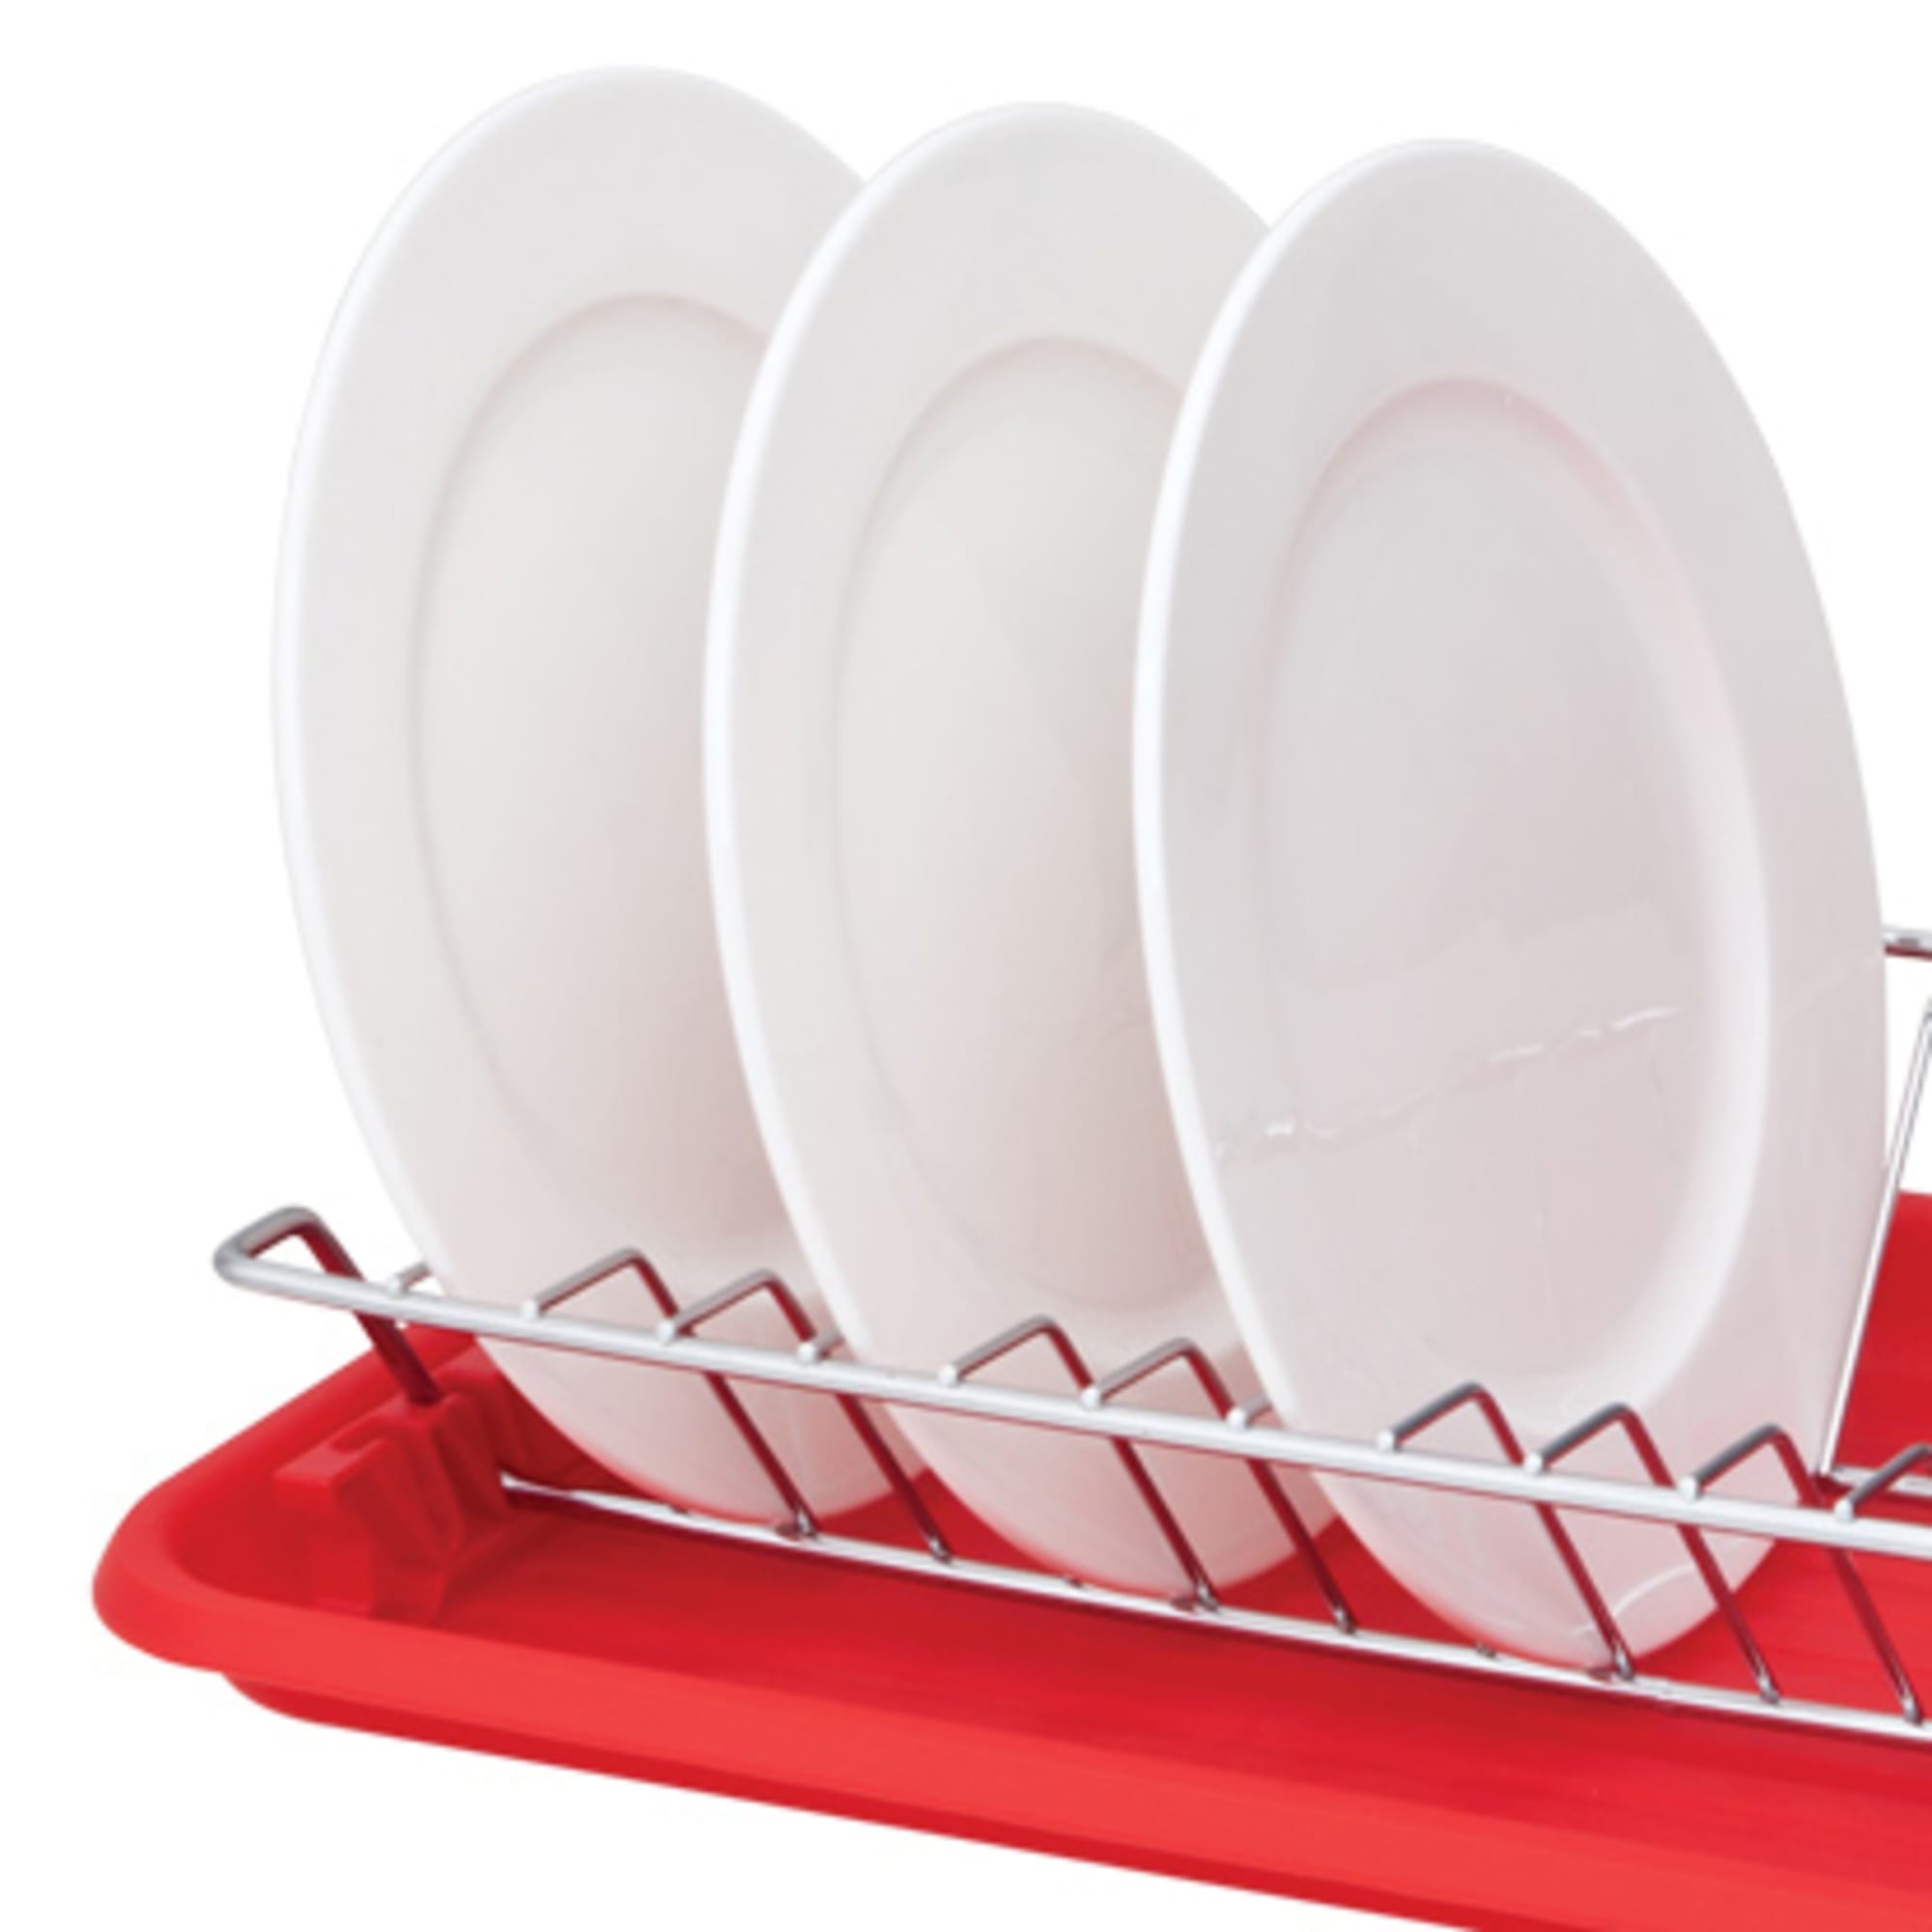 Home Basics Compact Dish Drainer $8.00 EACH, CASE PACK OF 12